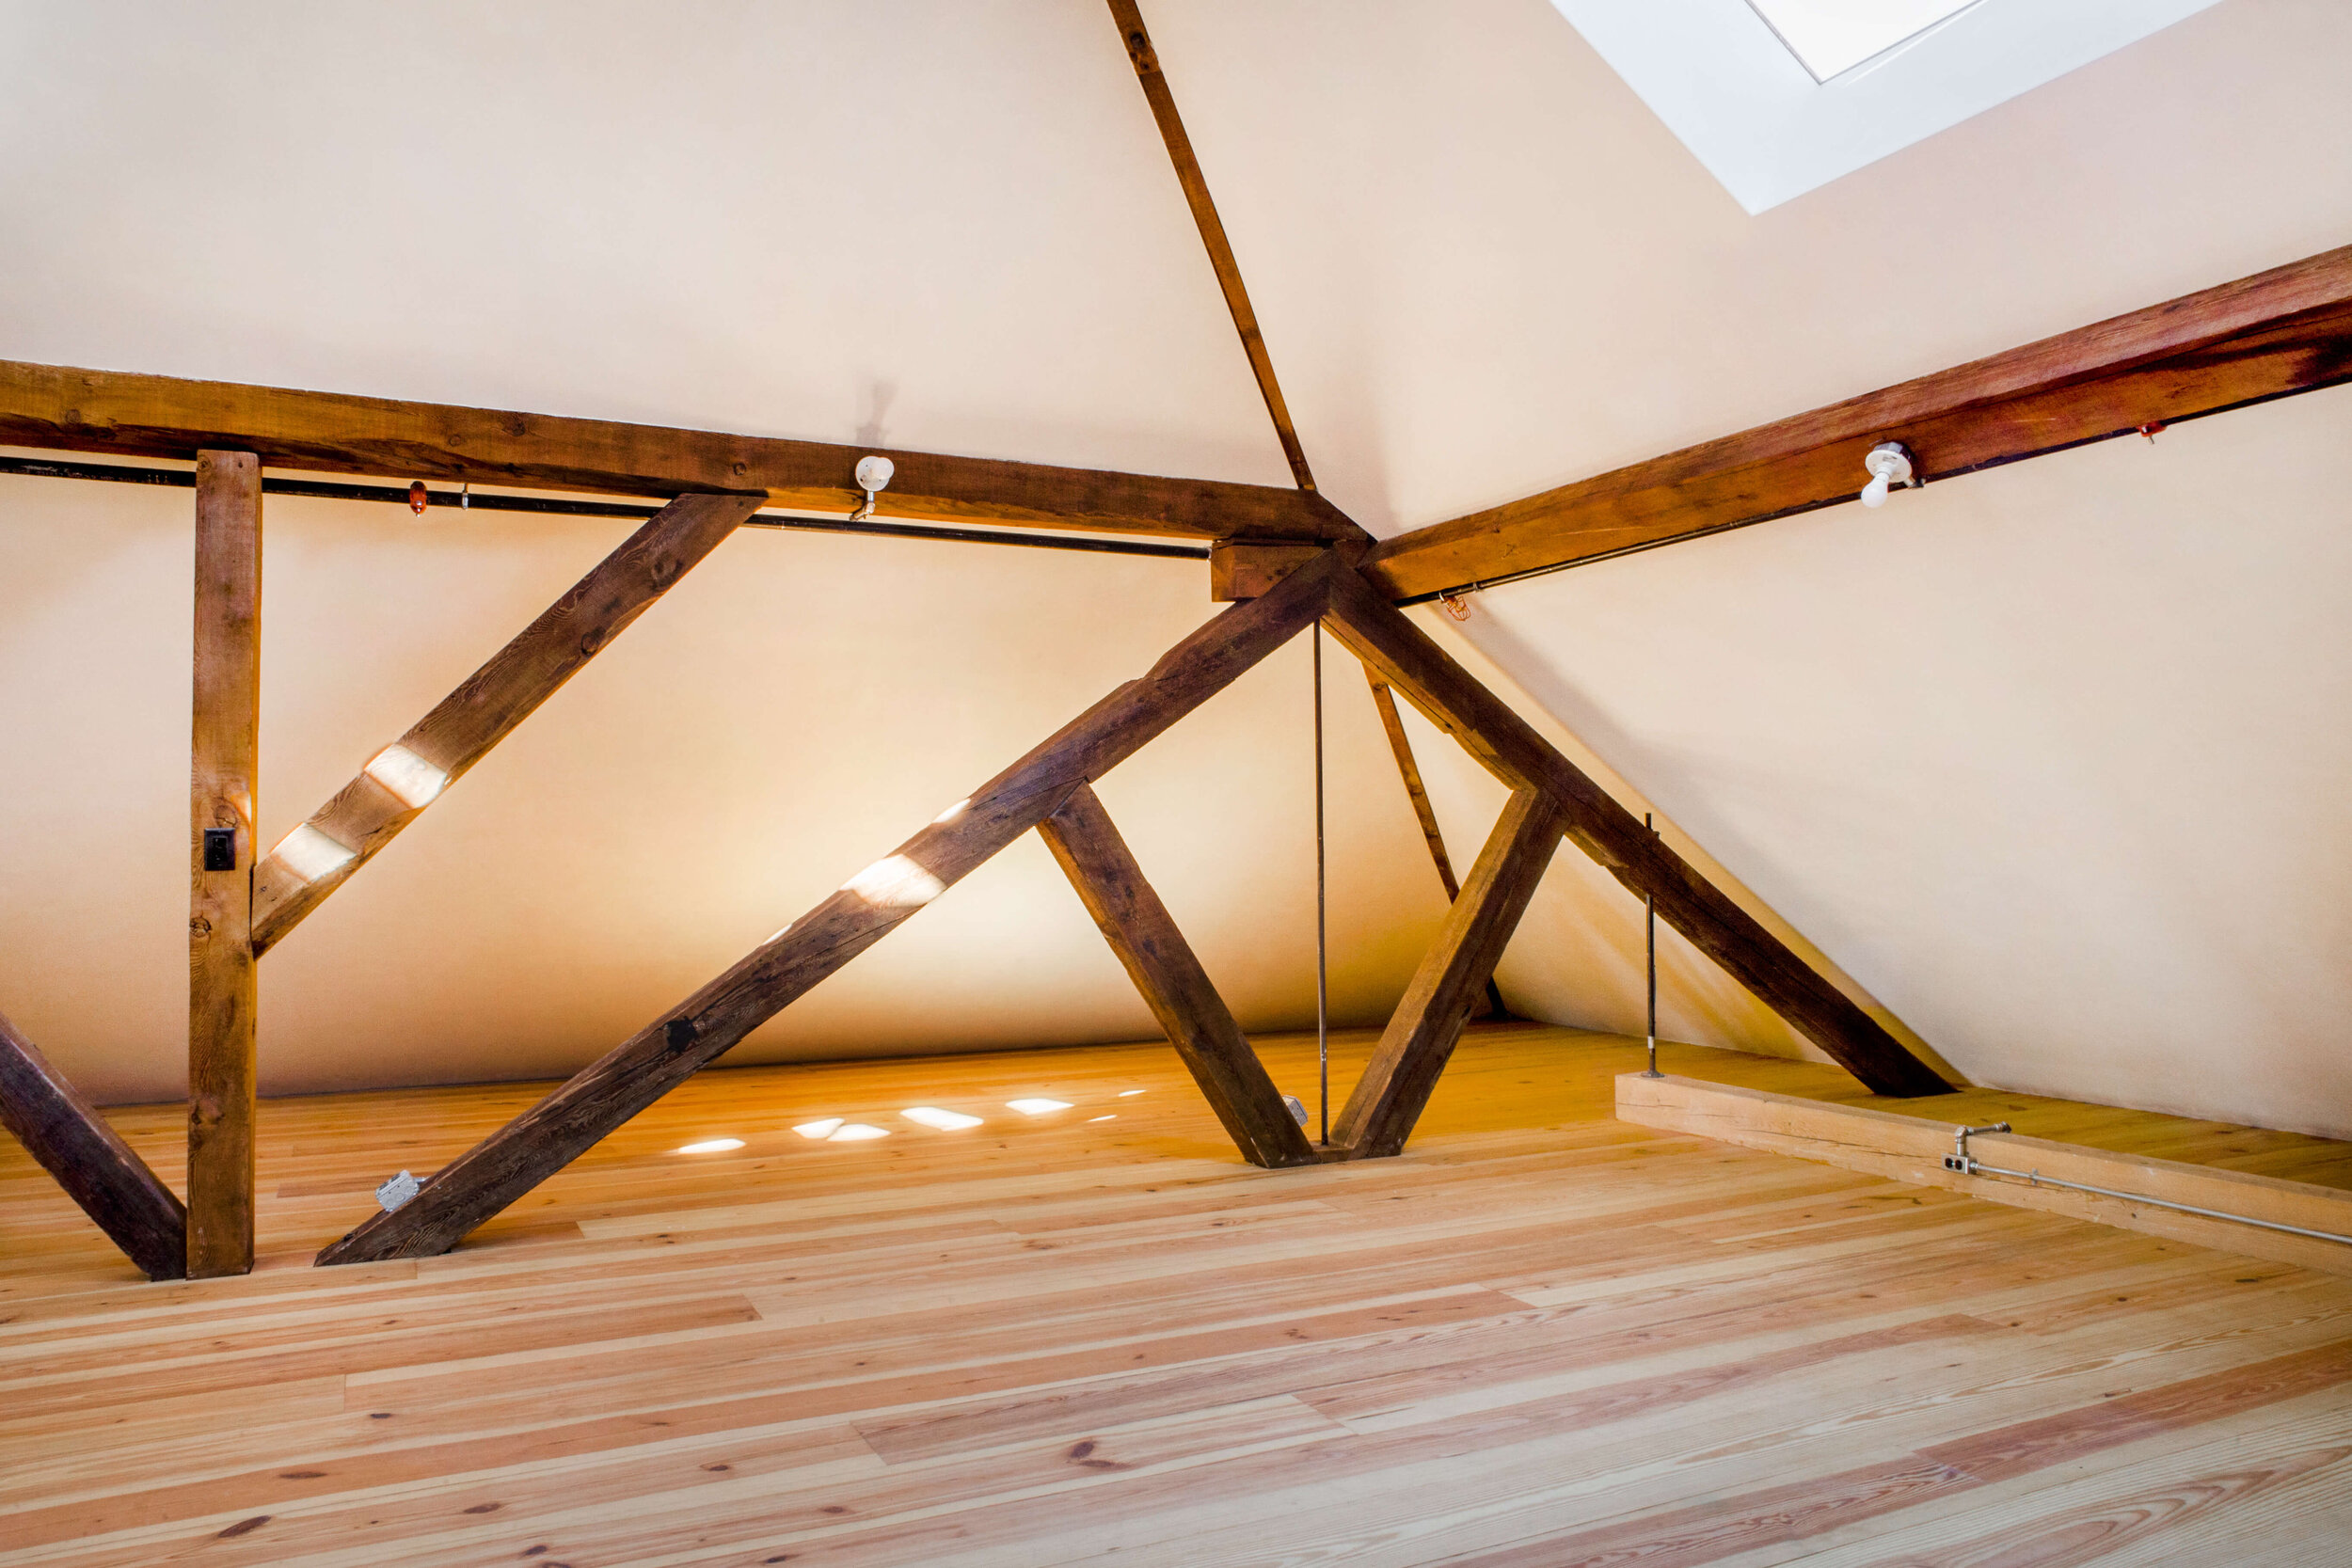 Attic, after